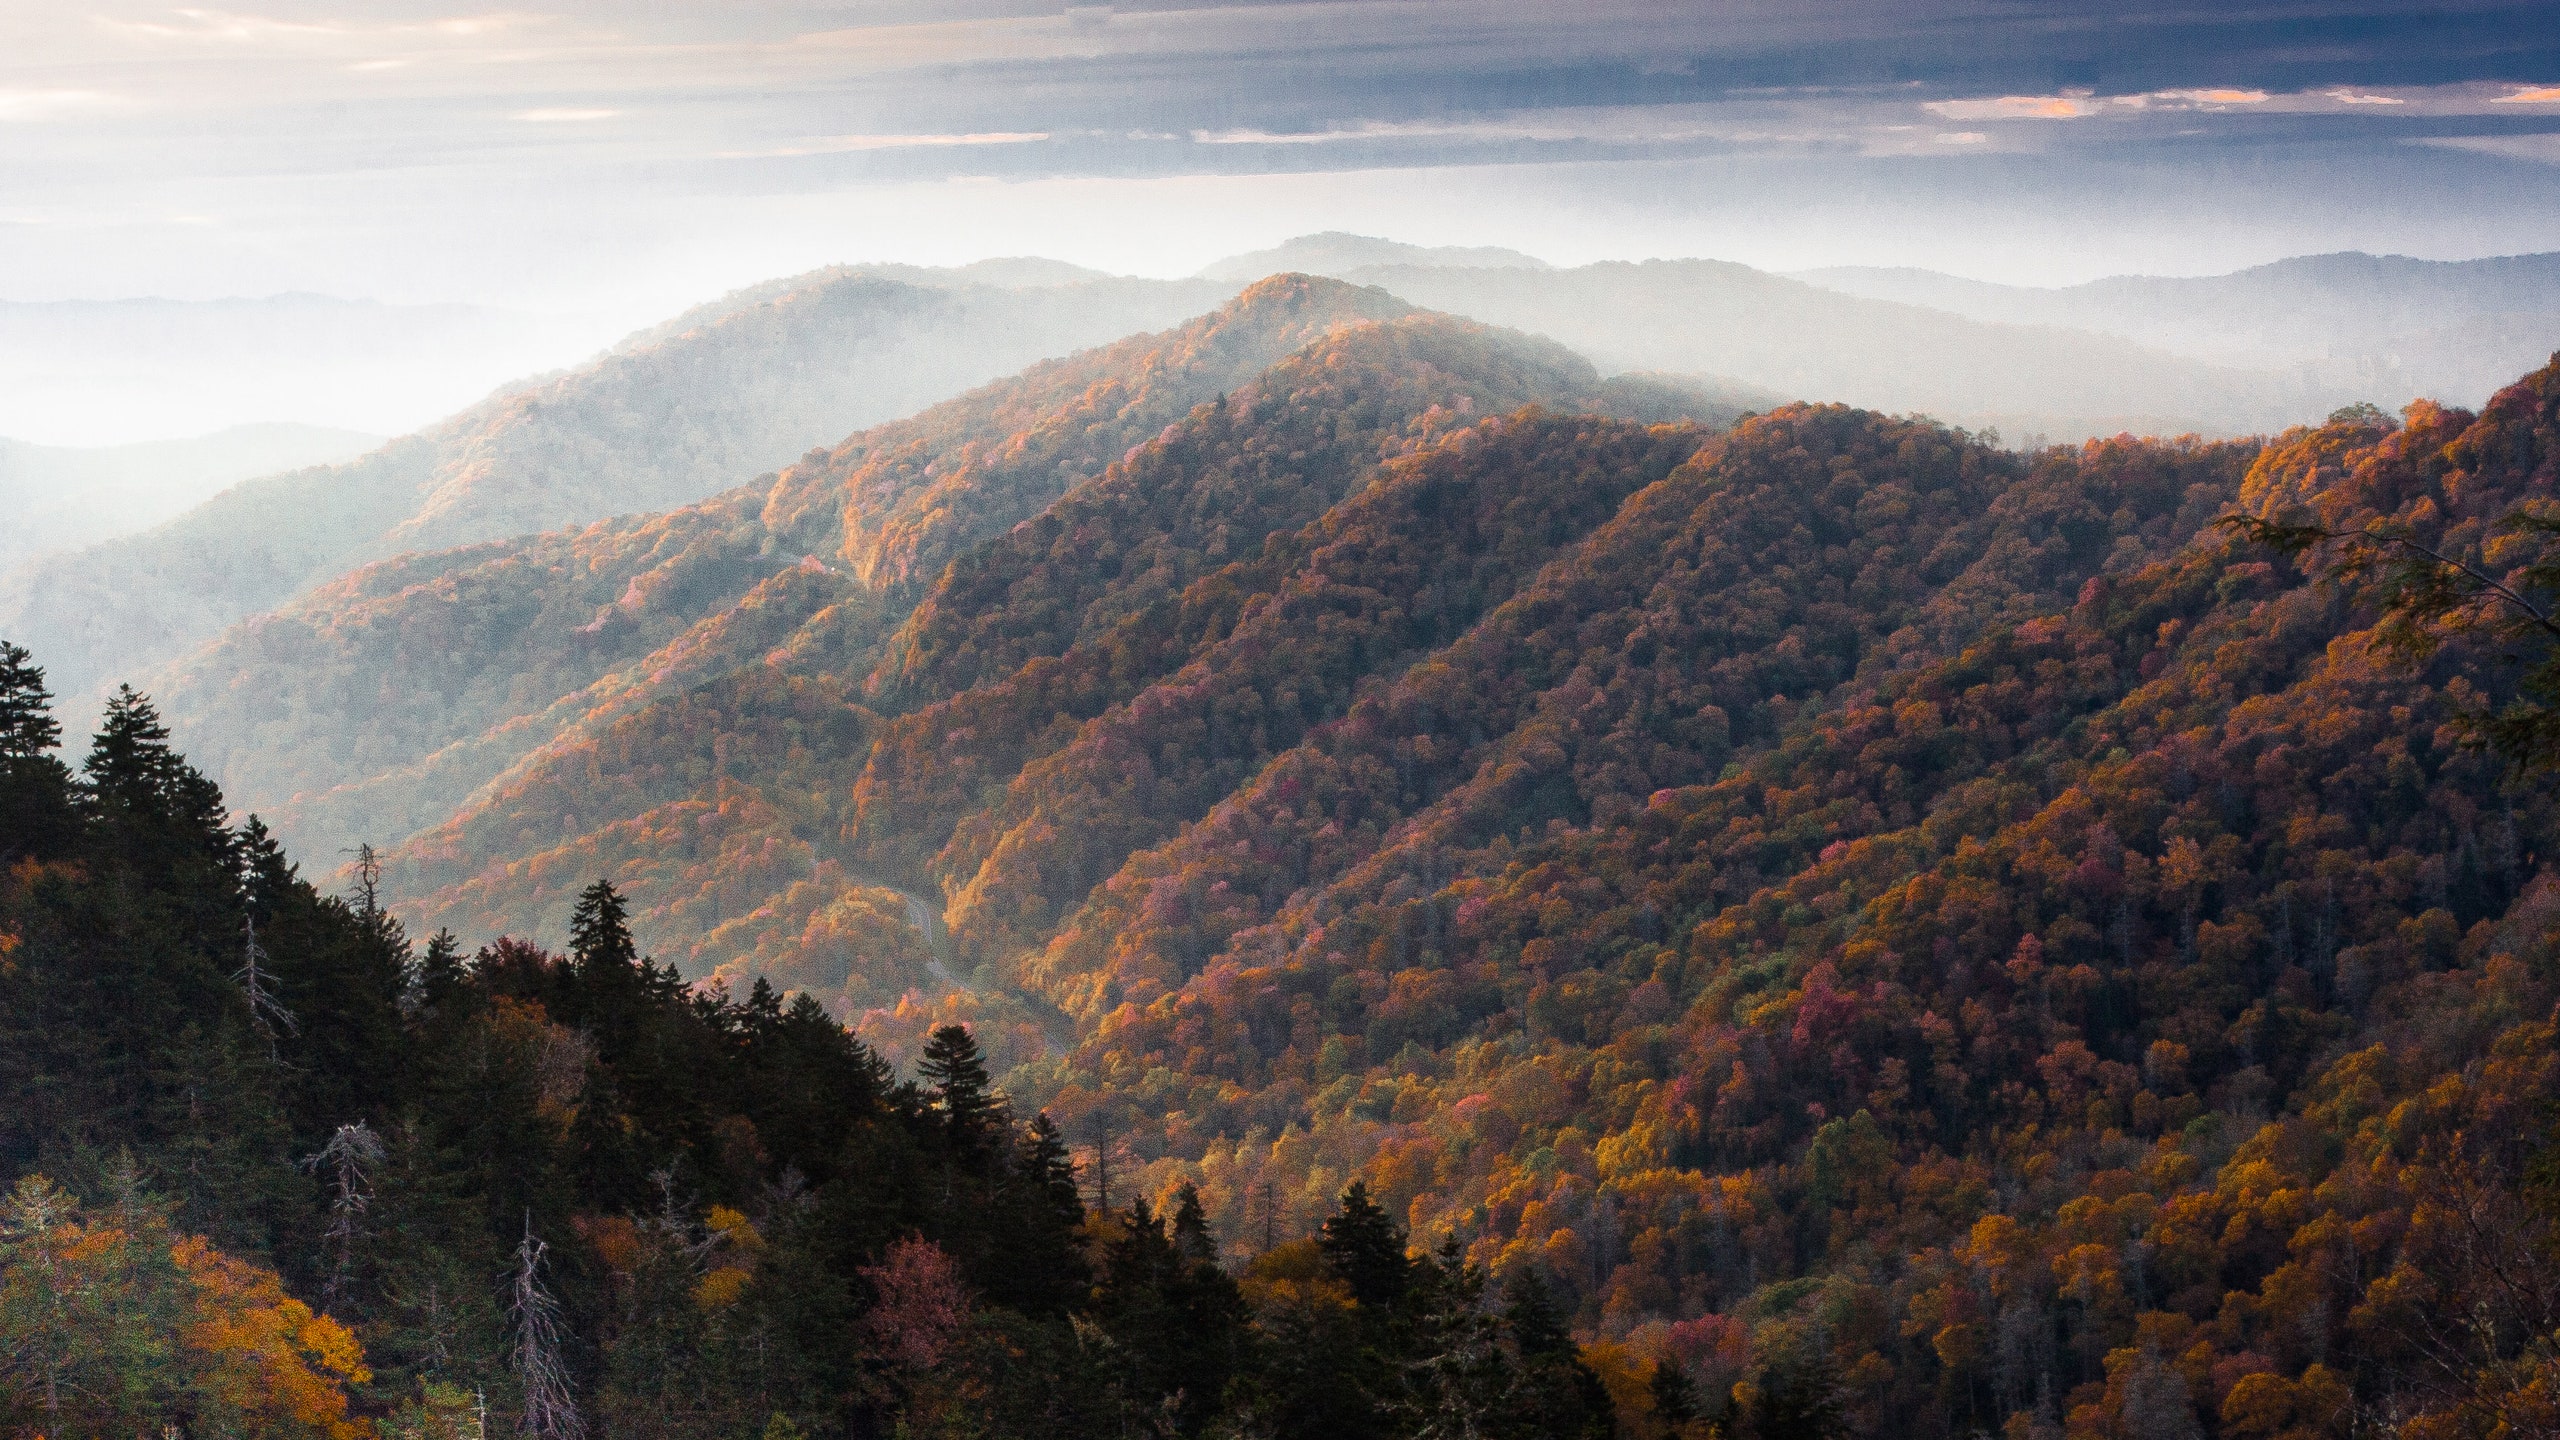 The Appalachian Mountains May Have Once Been as Tall as the Himalayas. Condé Nast Traveler